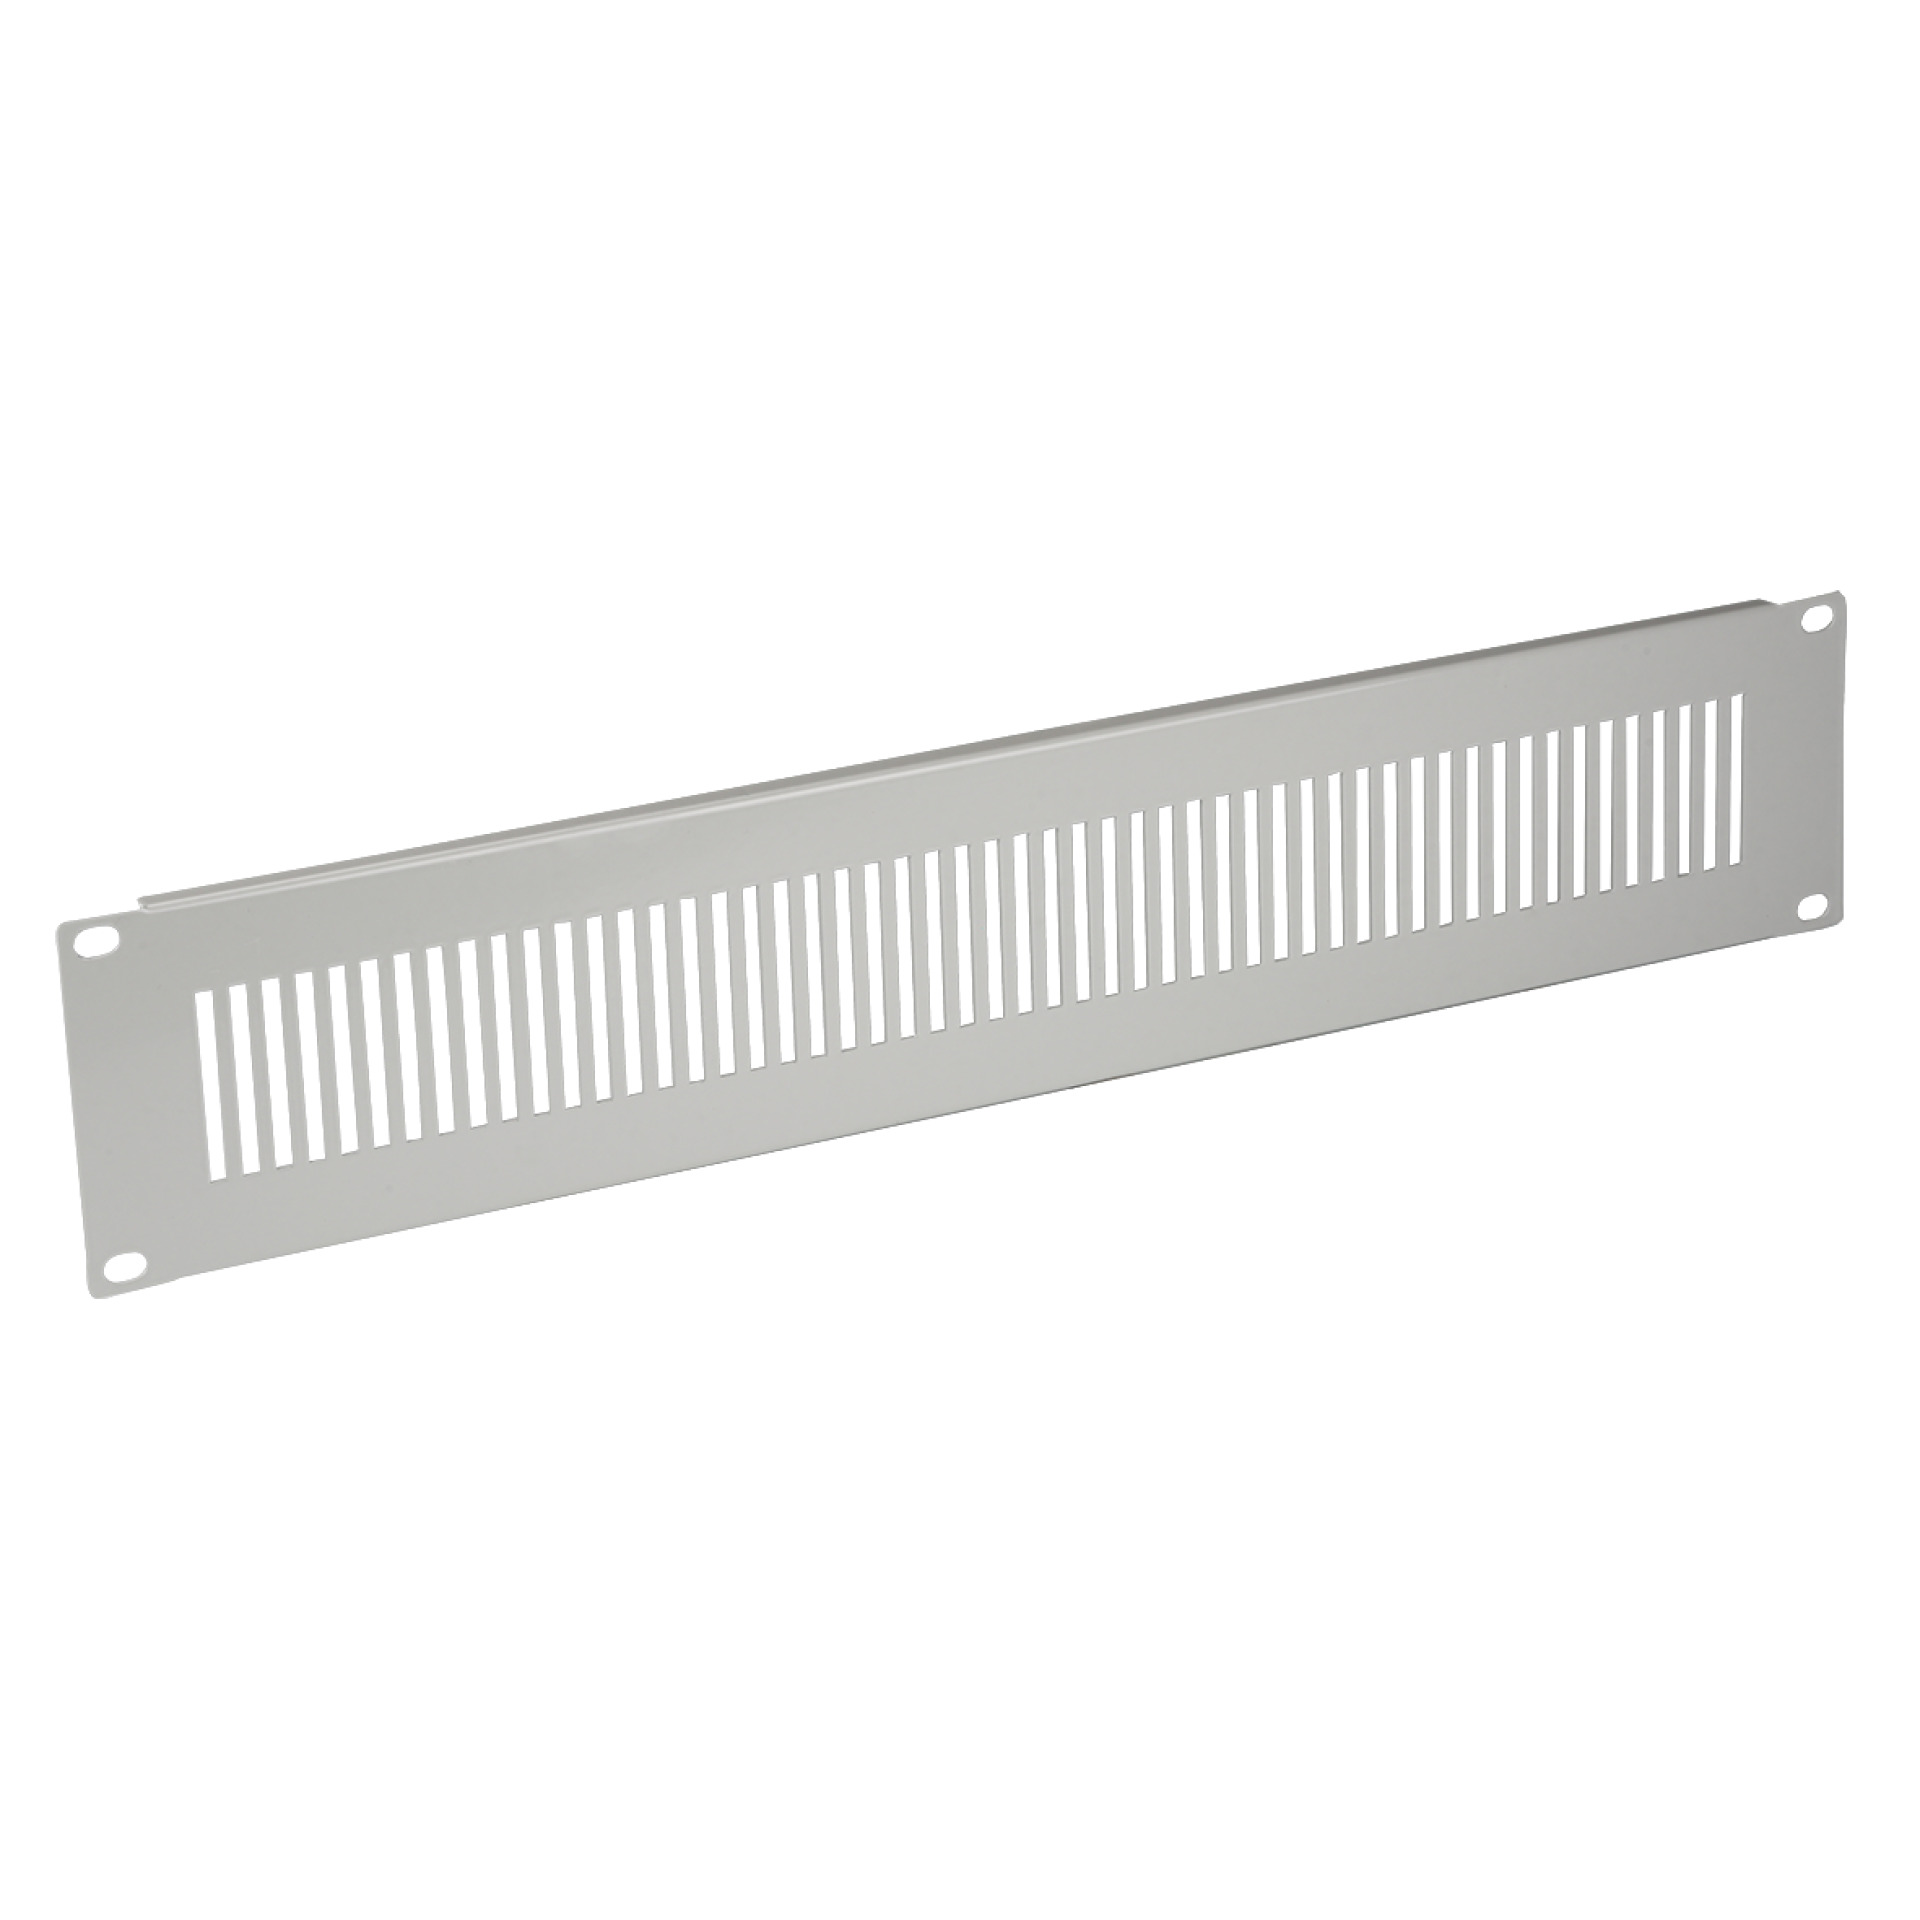 19" 1U Dummy Plate, Perforated, RAL9005